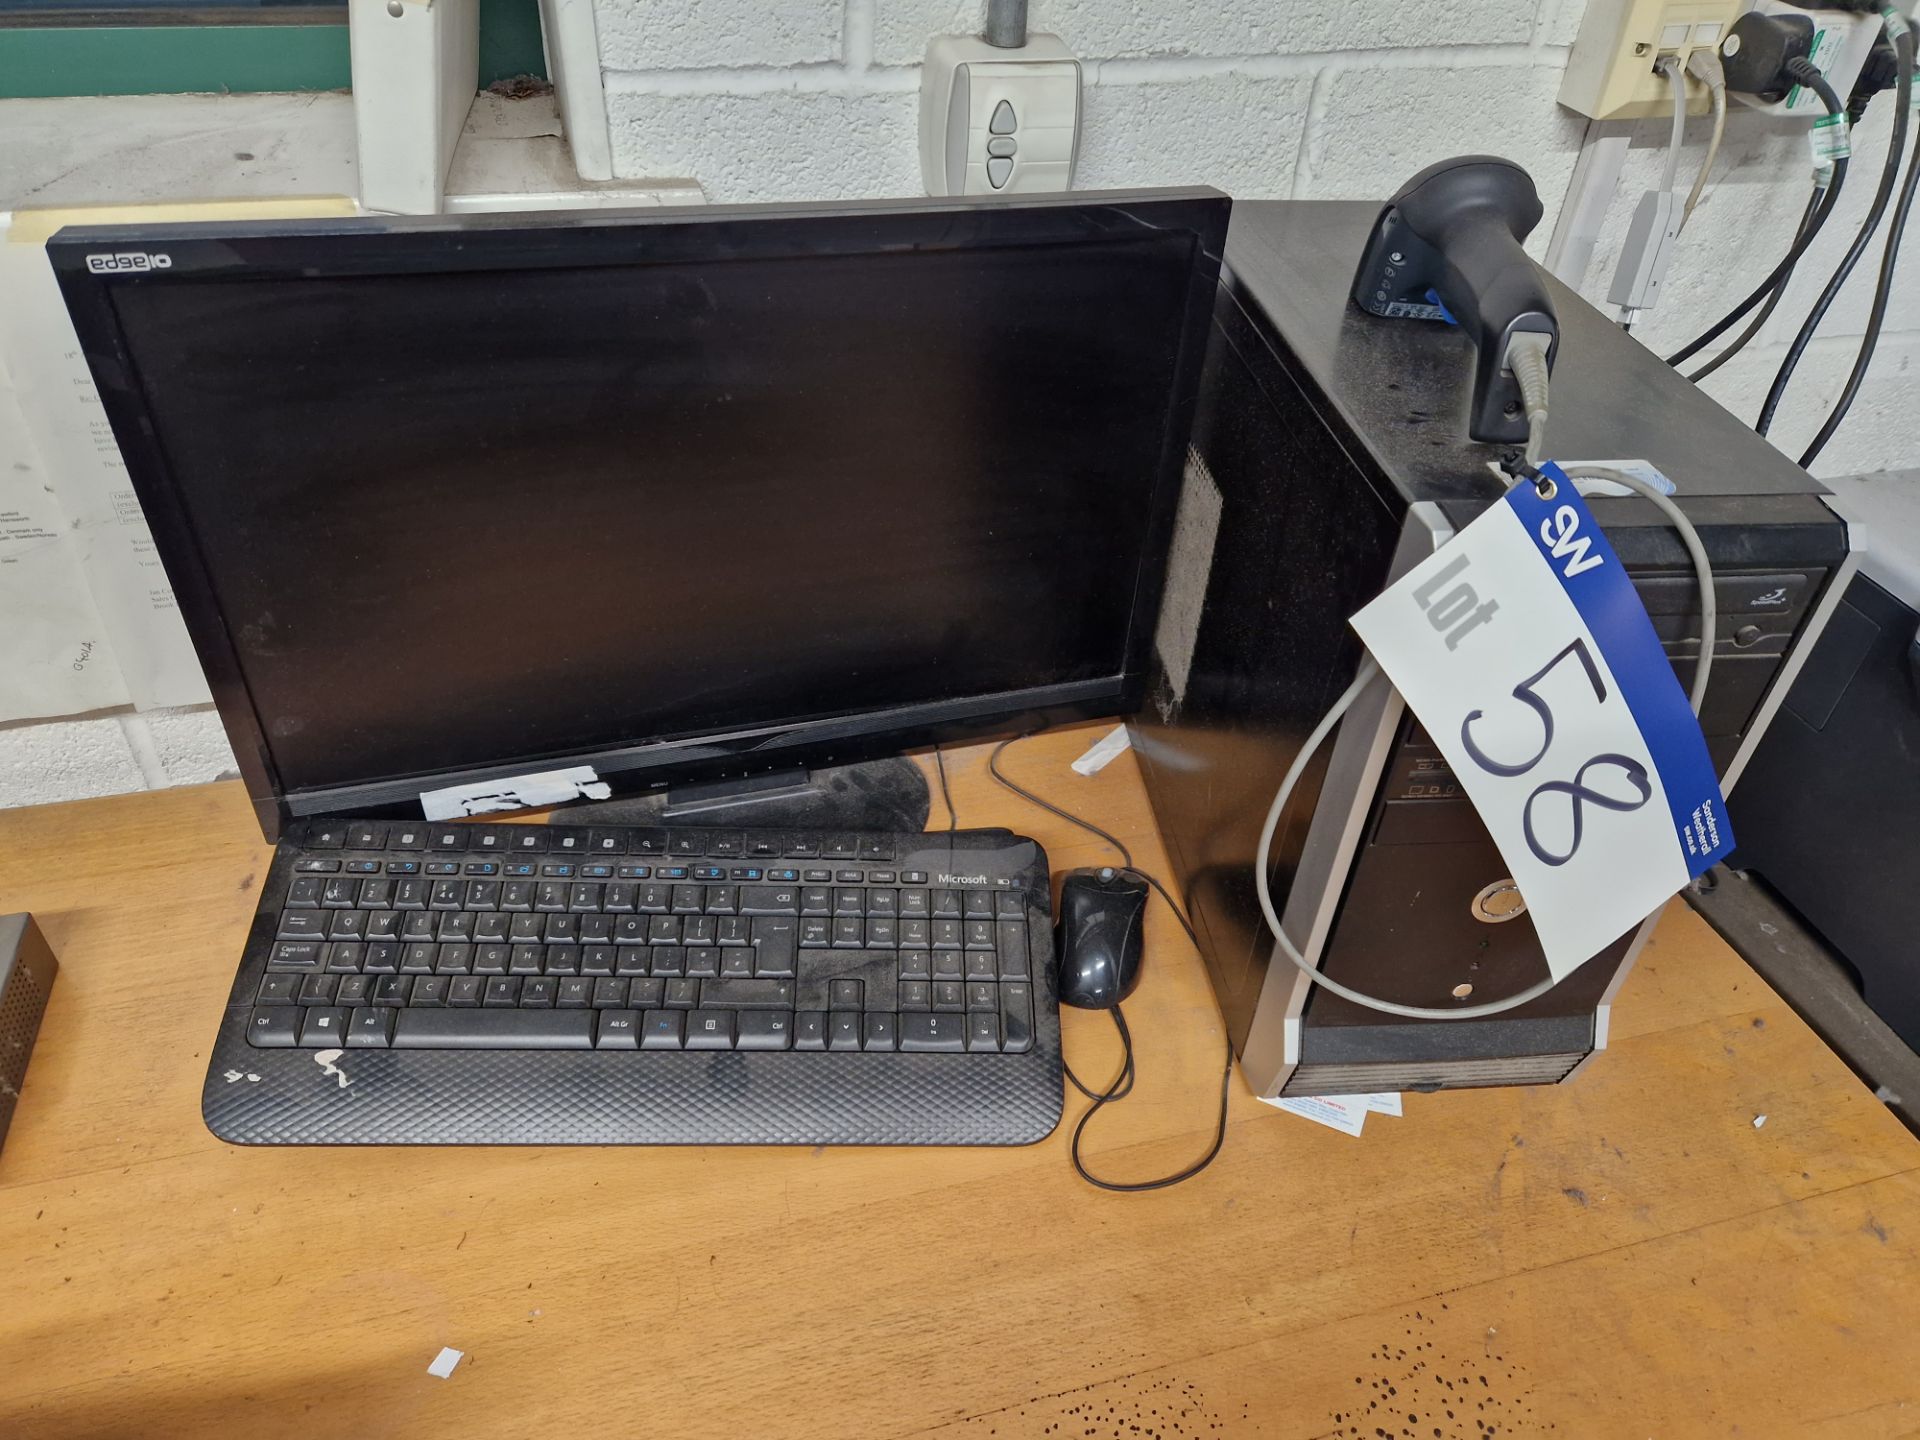 Unbranded Desktop PC, Monitor, Datalogic Scanner, Keyboard and Mouse (Hard Drive Wiped) Please